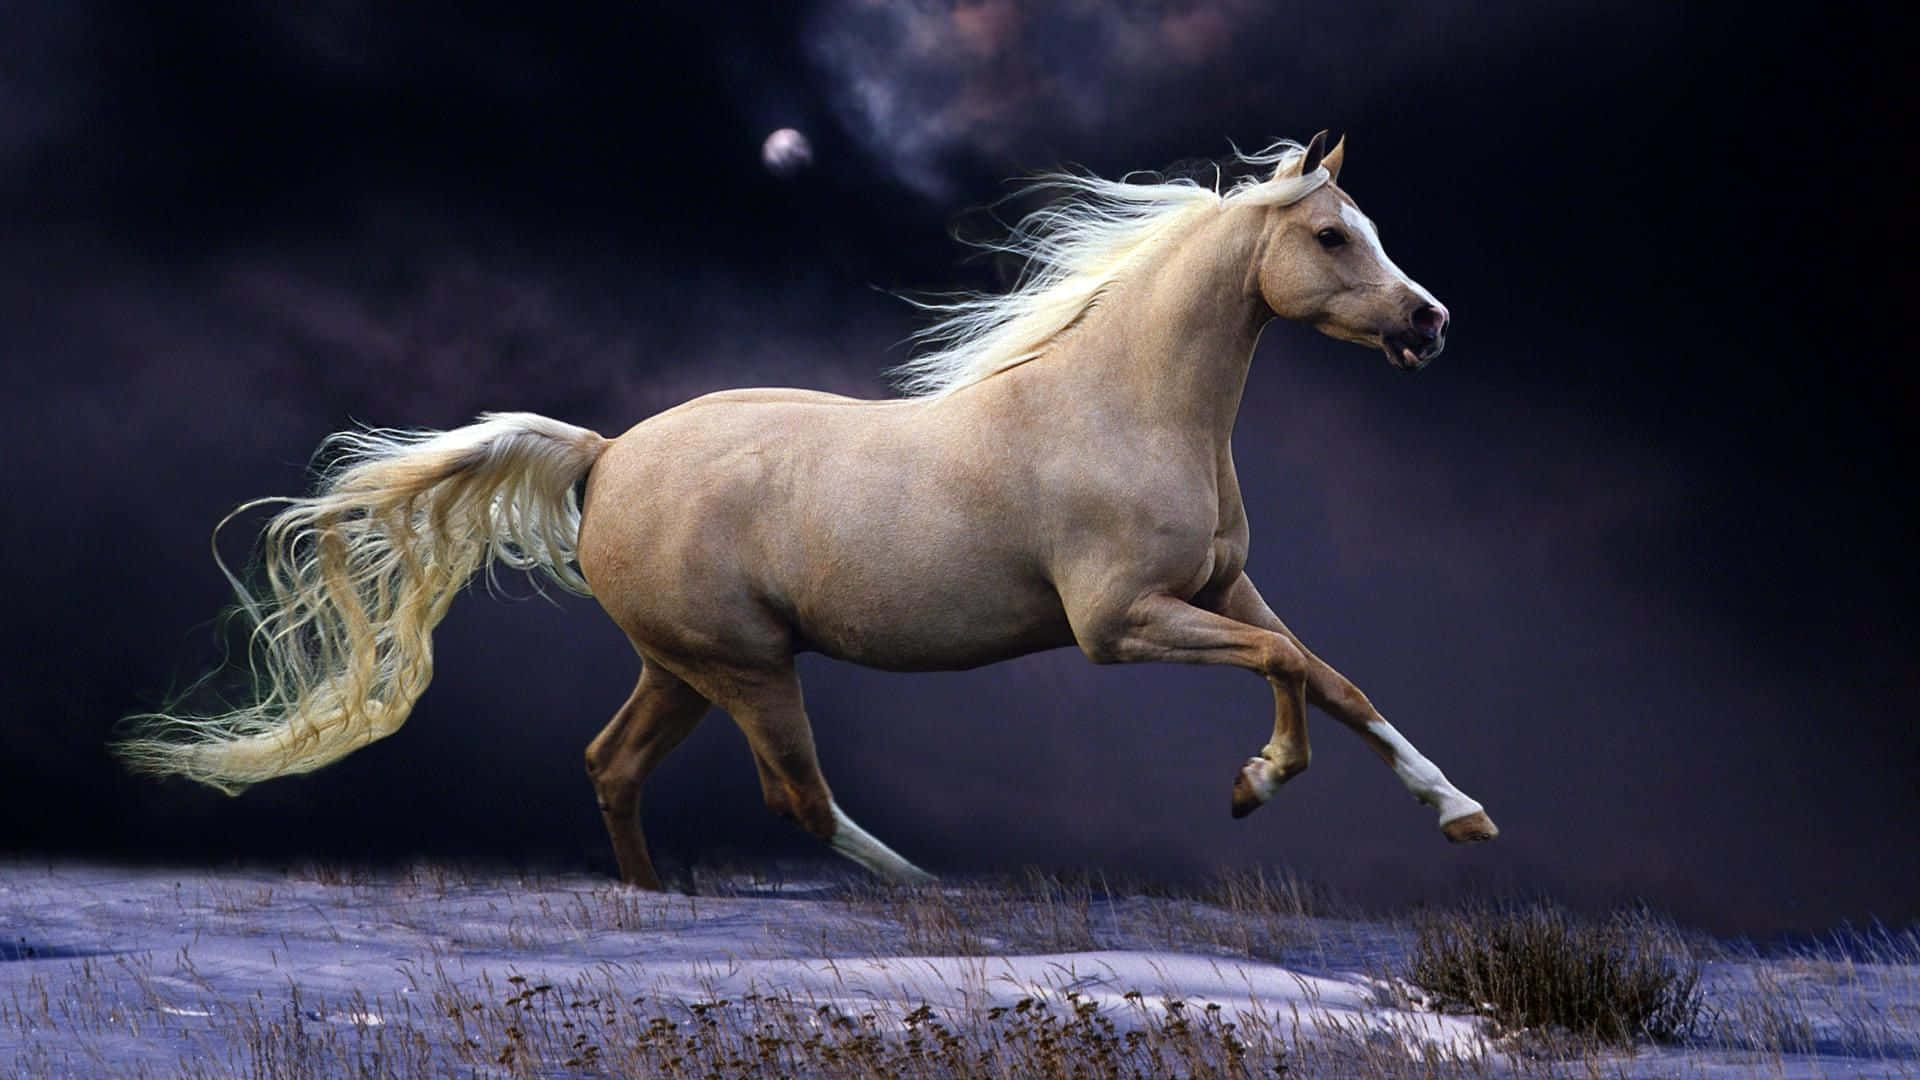 Majestic Beauty: A Stunning Horse In A Natural Setting